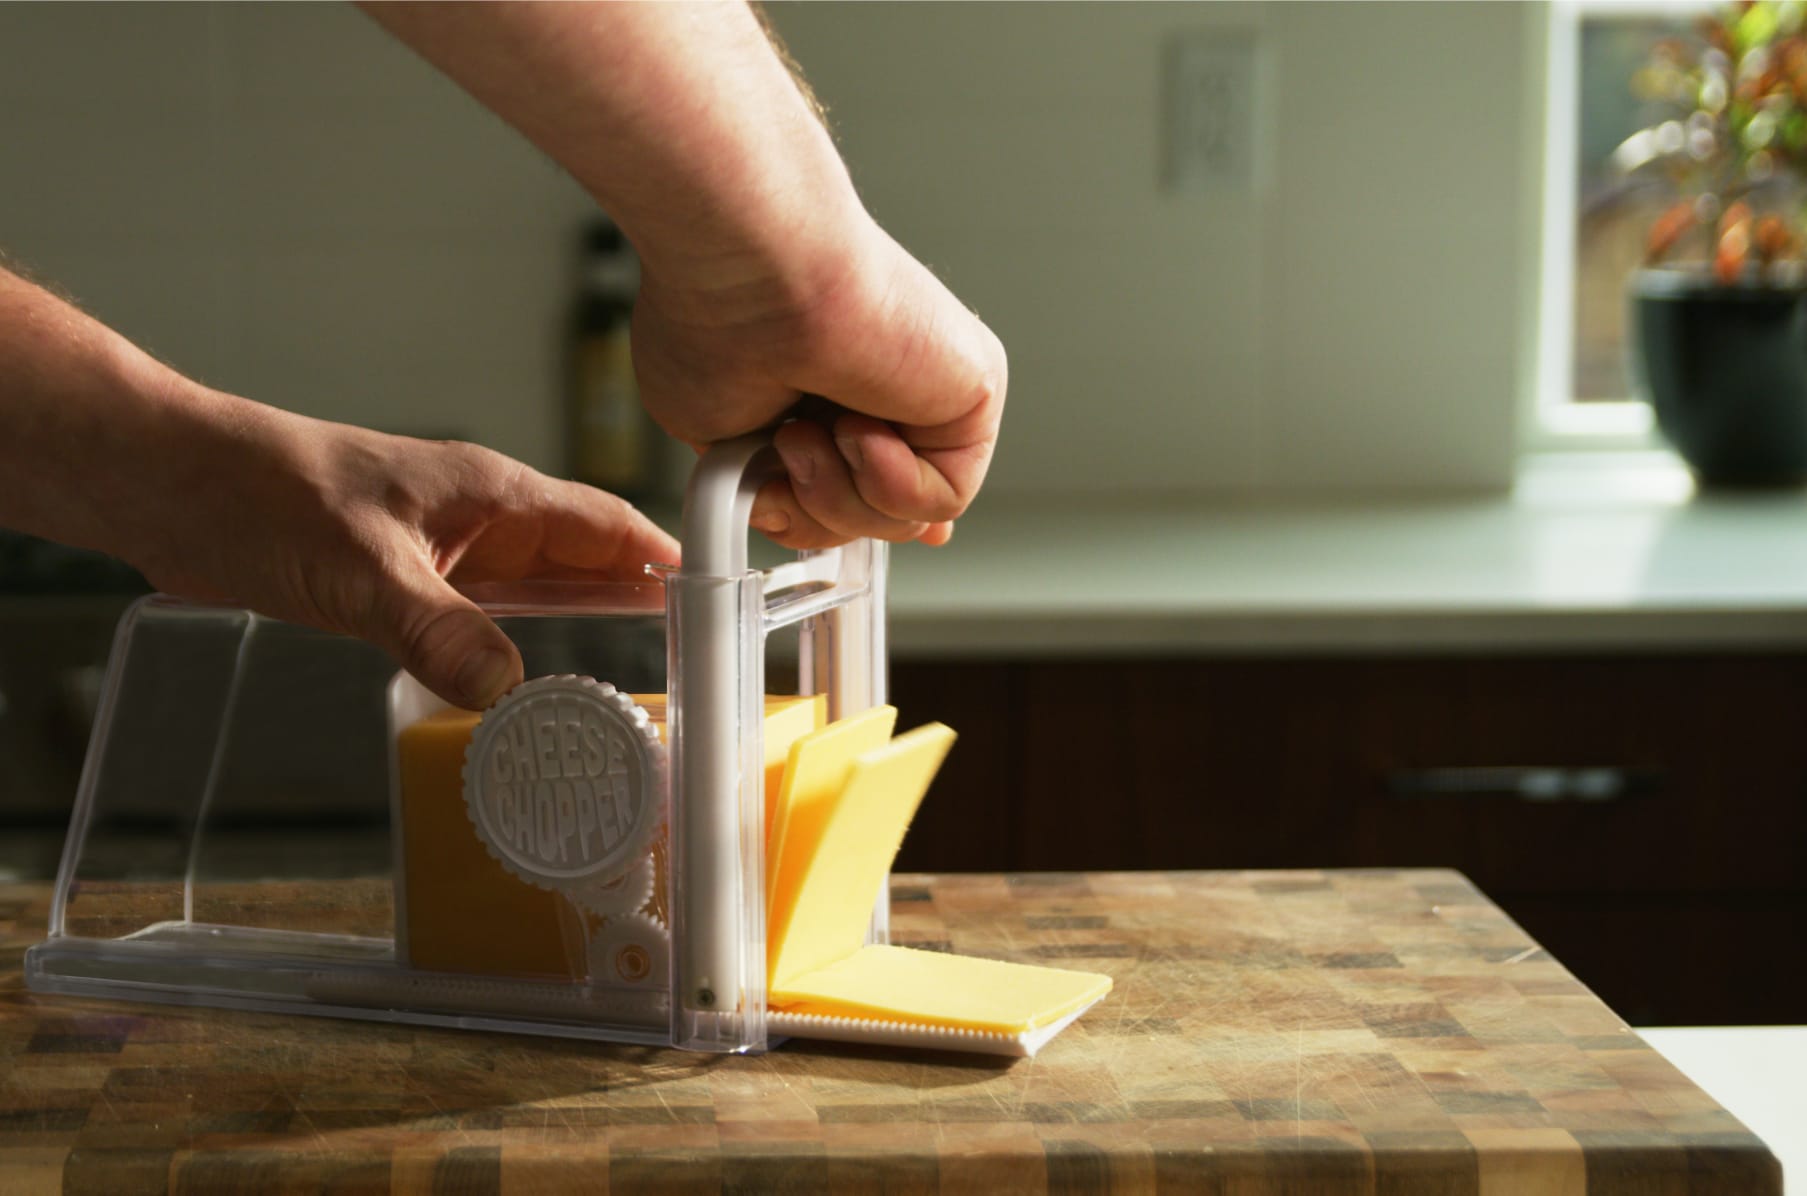 Indiegogo: 📢 Update #4 from THE CHEESE CHOPPER: World's Best Cheese Device